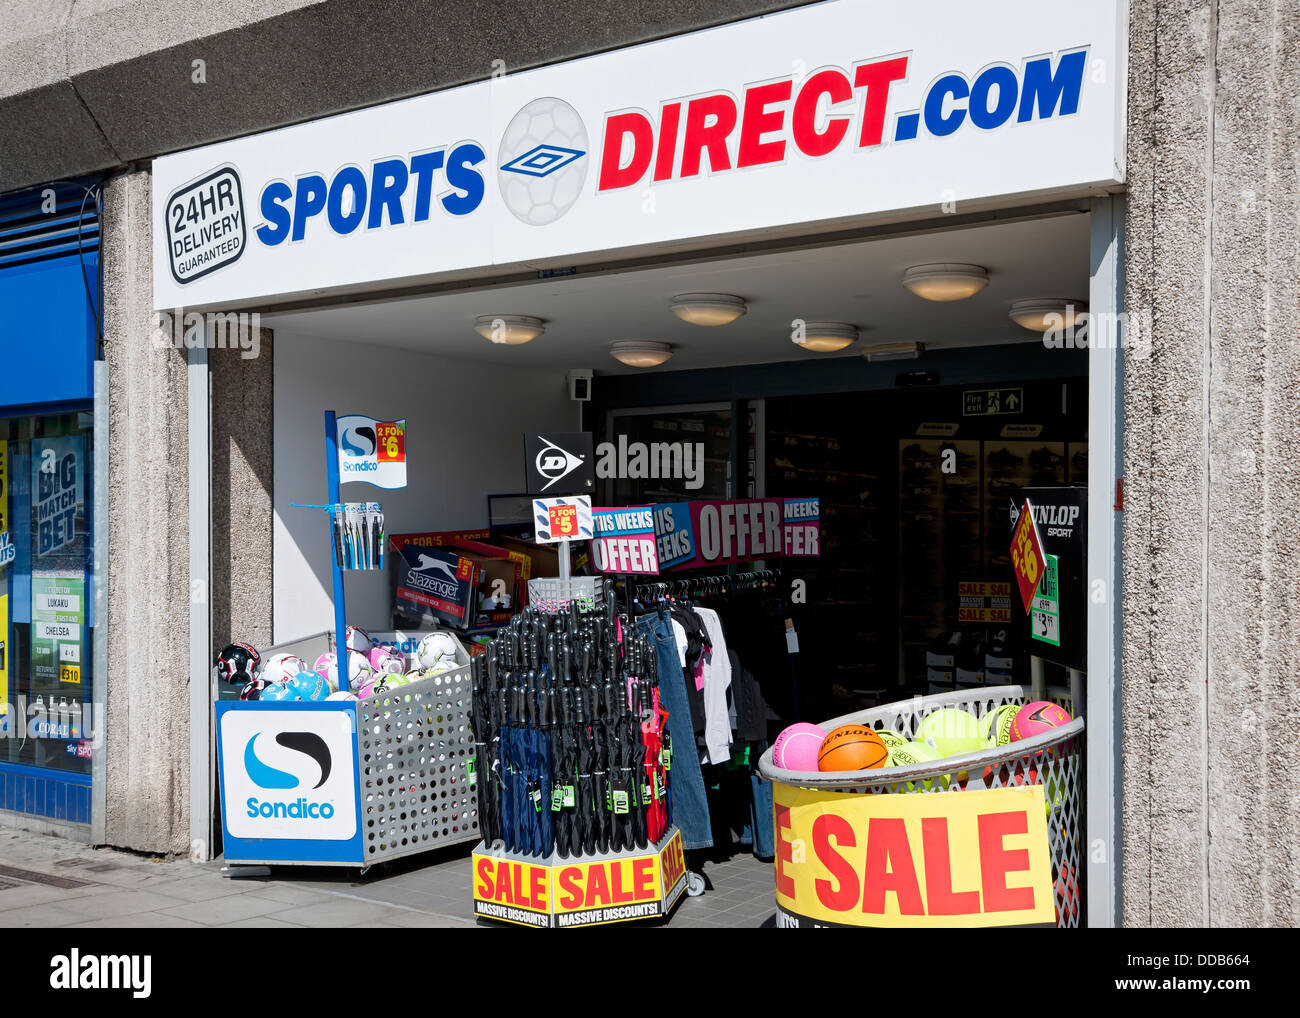 Sports Direct Sports Direct.com shop store Scarborough North Yorkshire England UK United Kingdom GB Great Britain Stock Photo